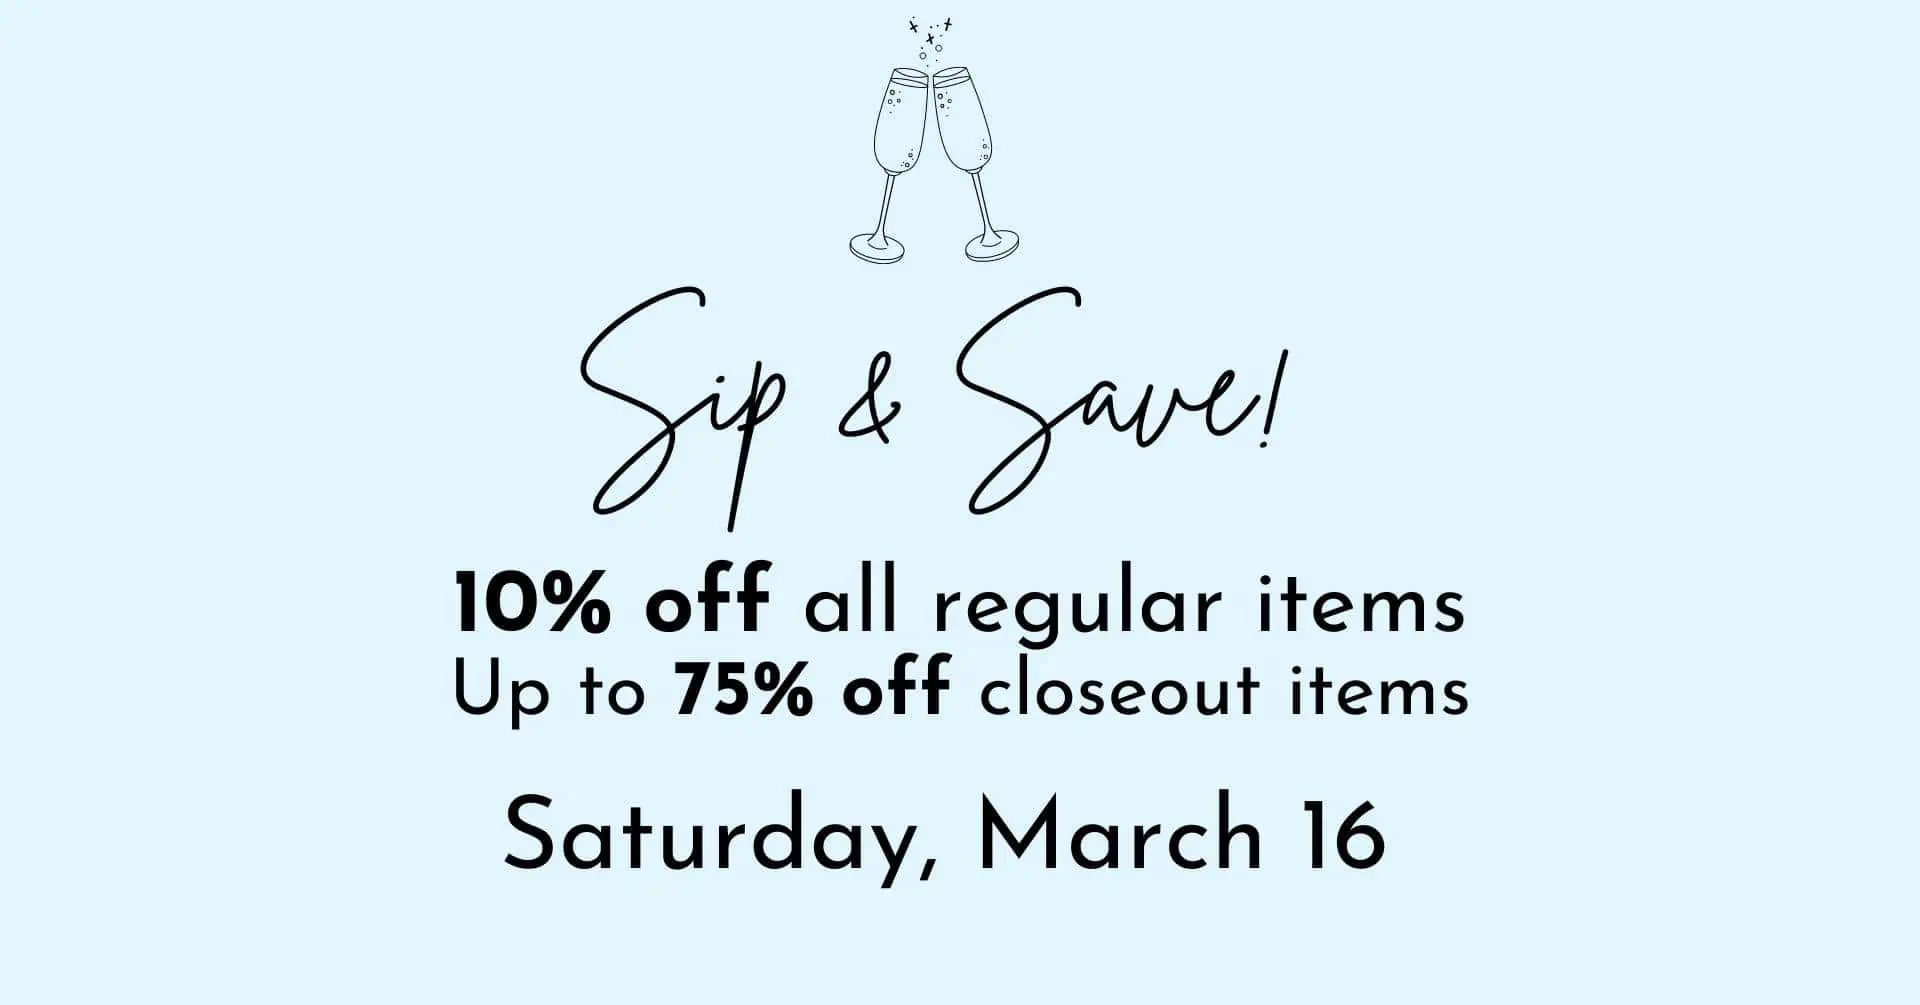 Sip & Save! 10% off all regular items Up to 75% off closeout items at Upstairs Boutique